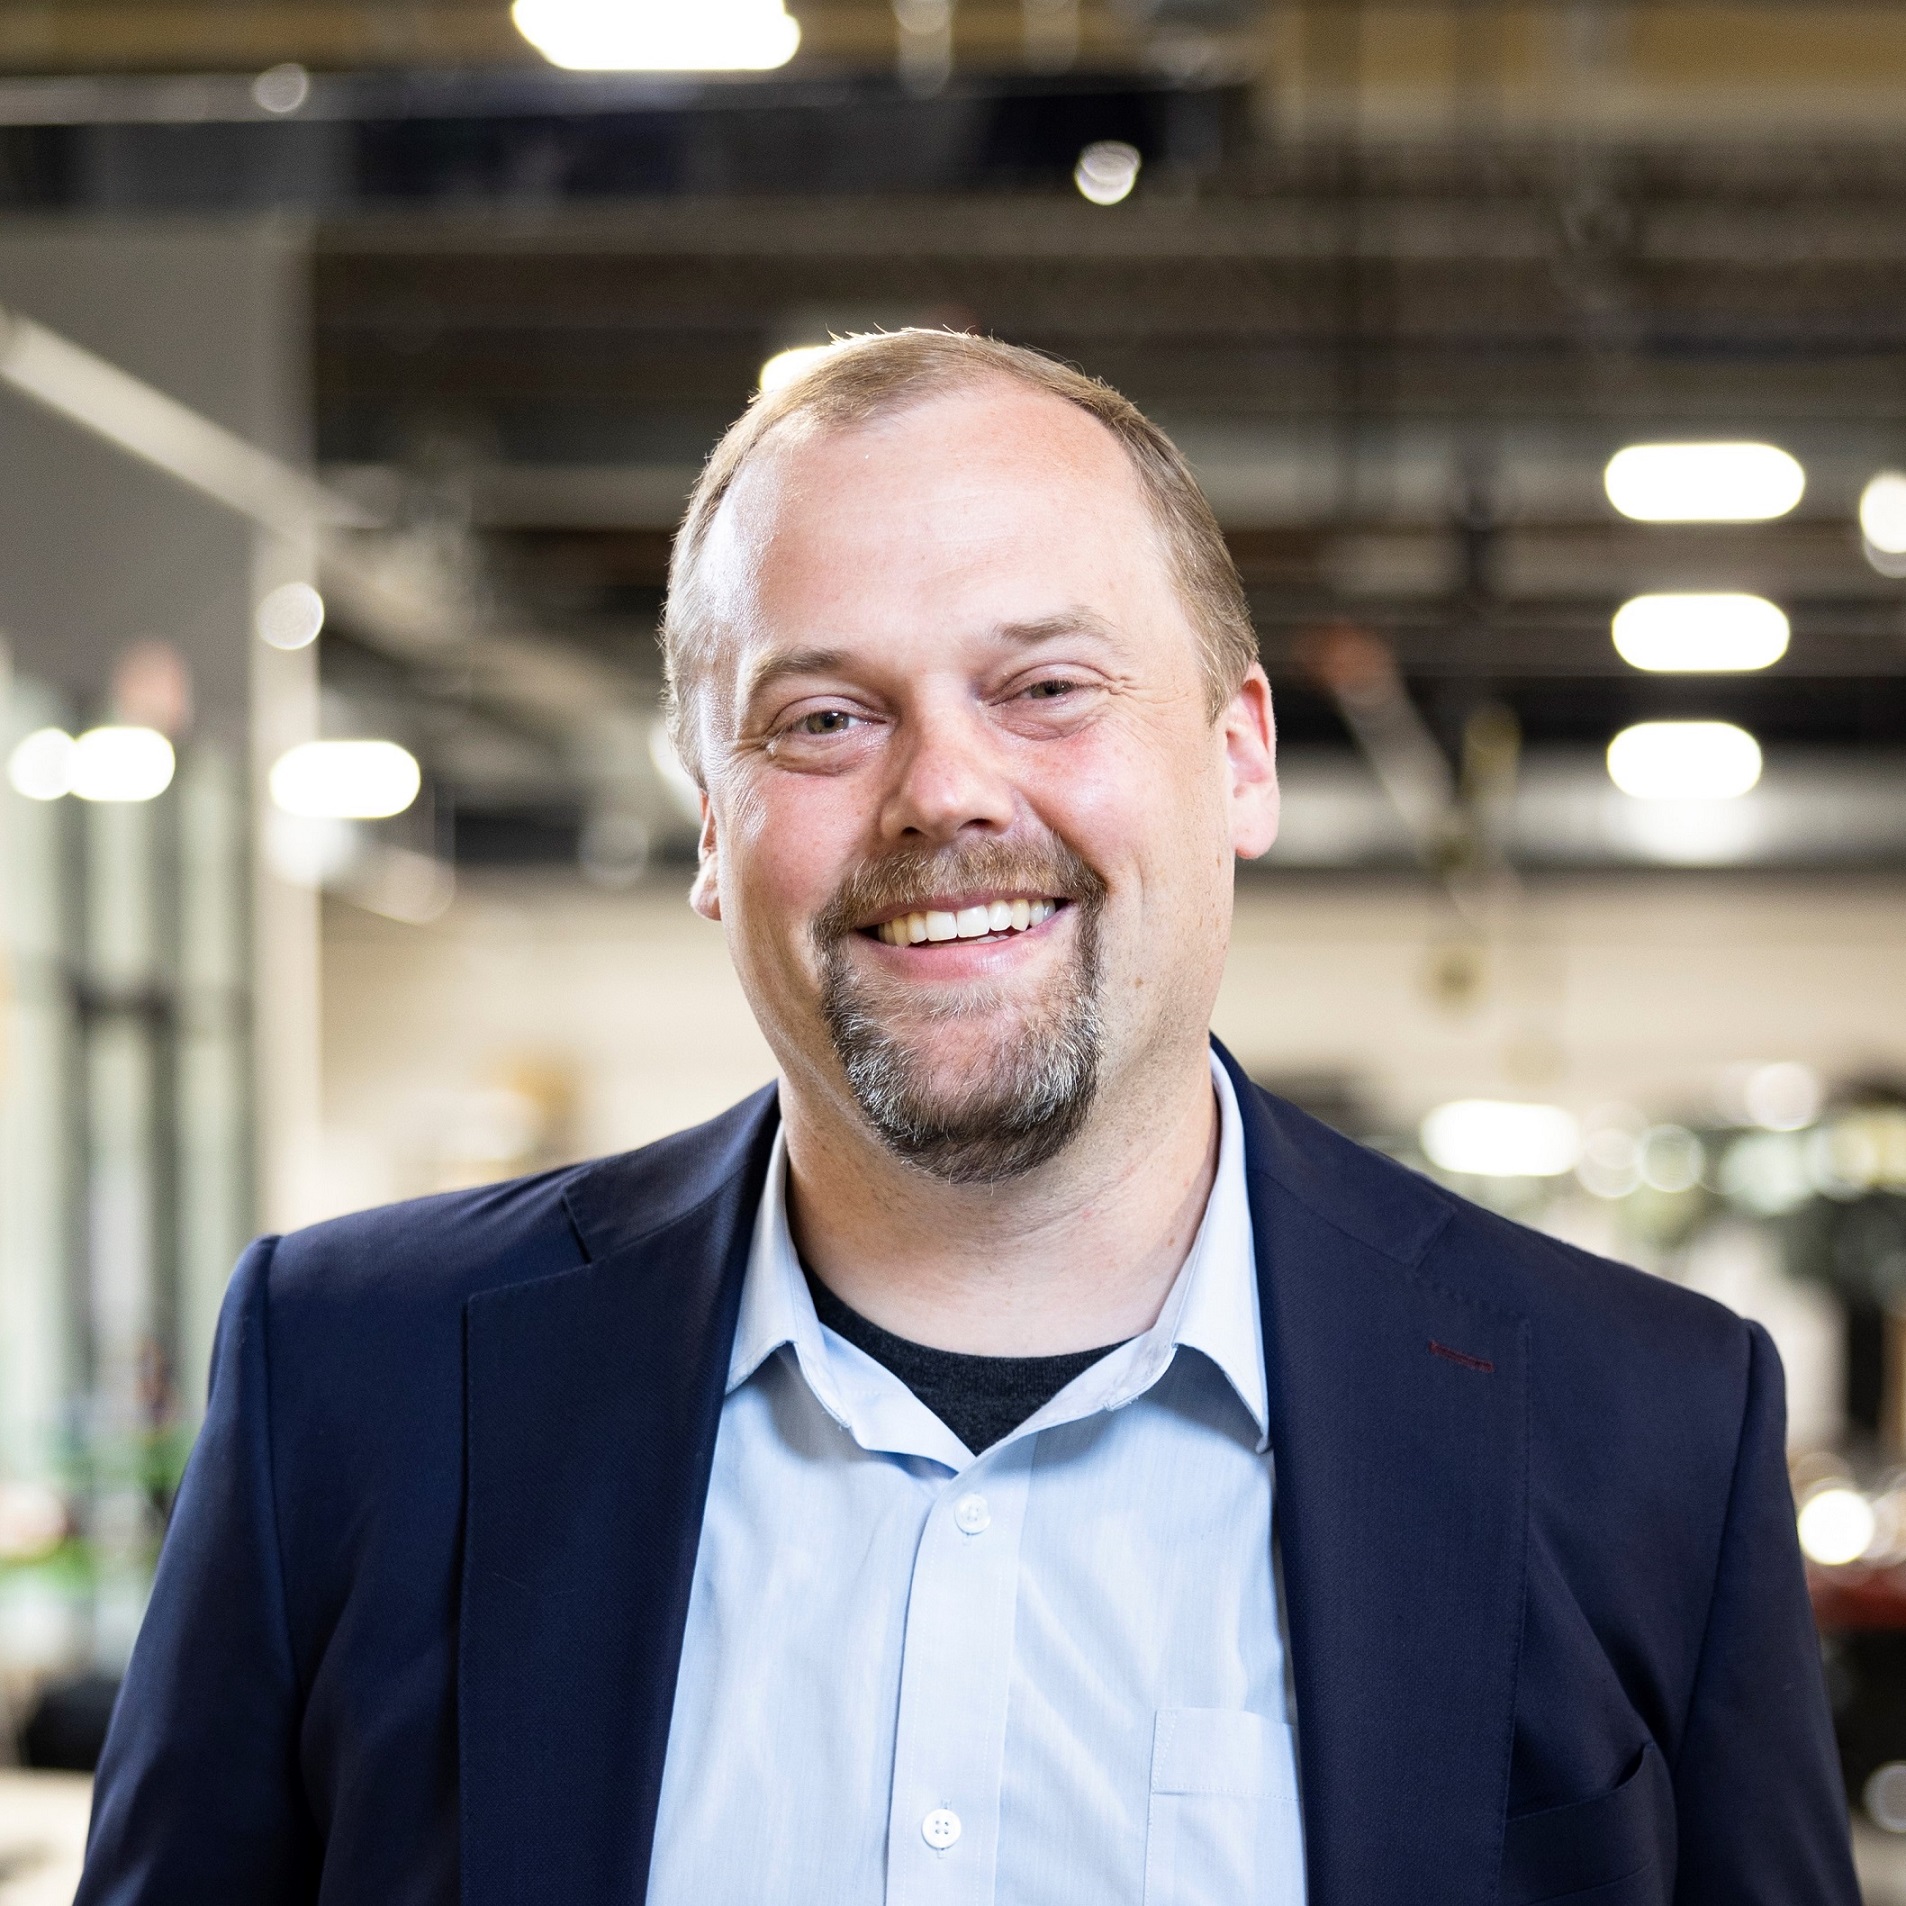 Edwin Olson, co-founder and CEO of May Mobility, Inc.